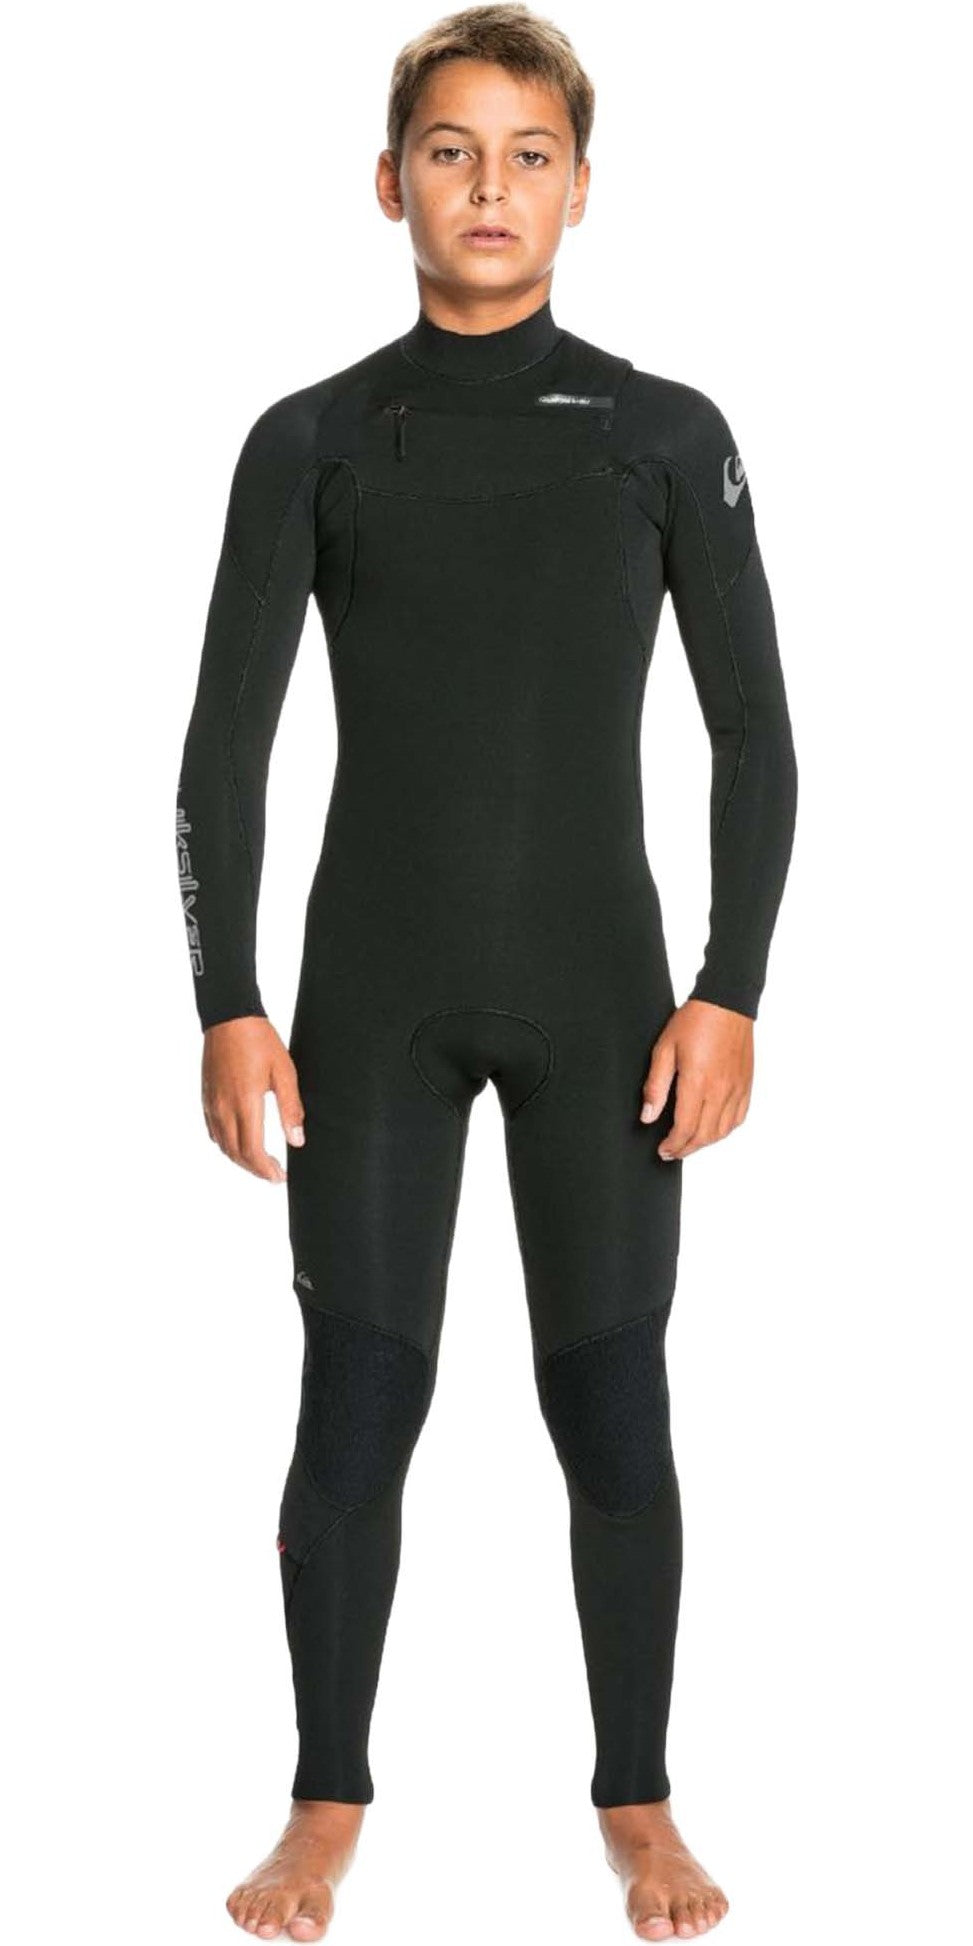 QUIKSILVER BOYS EVERYDAY SESSIONS 4/3MM CHEST ZIP WETSUIT